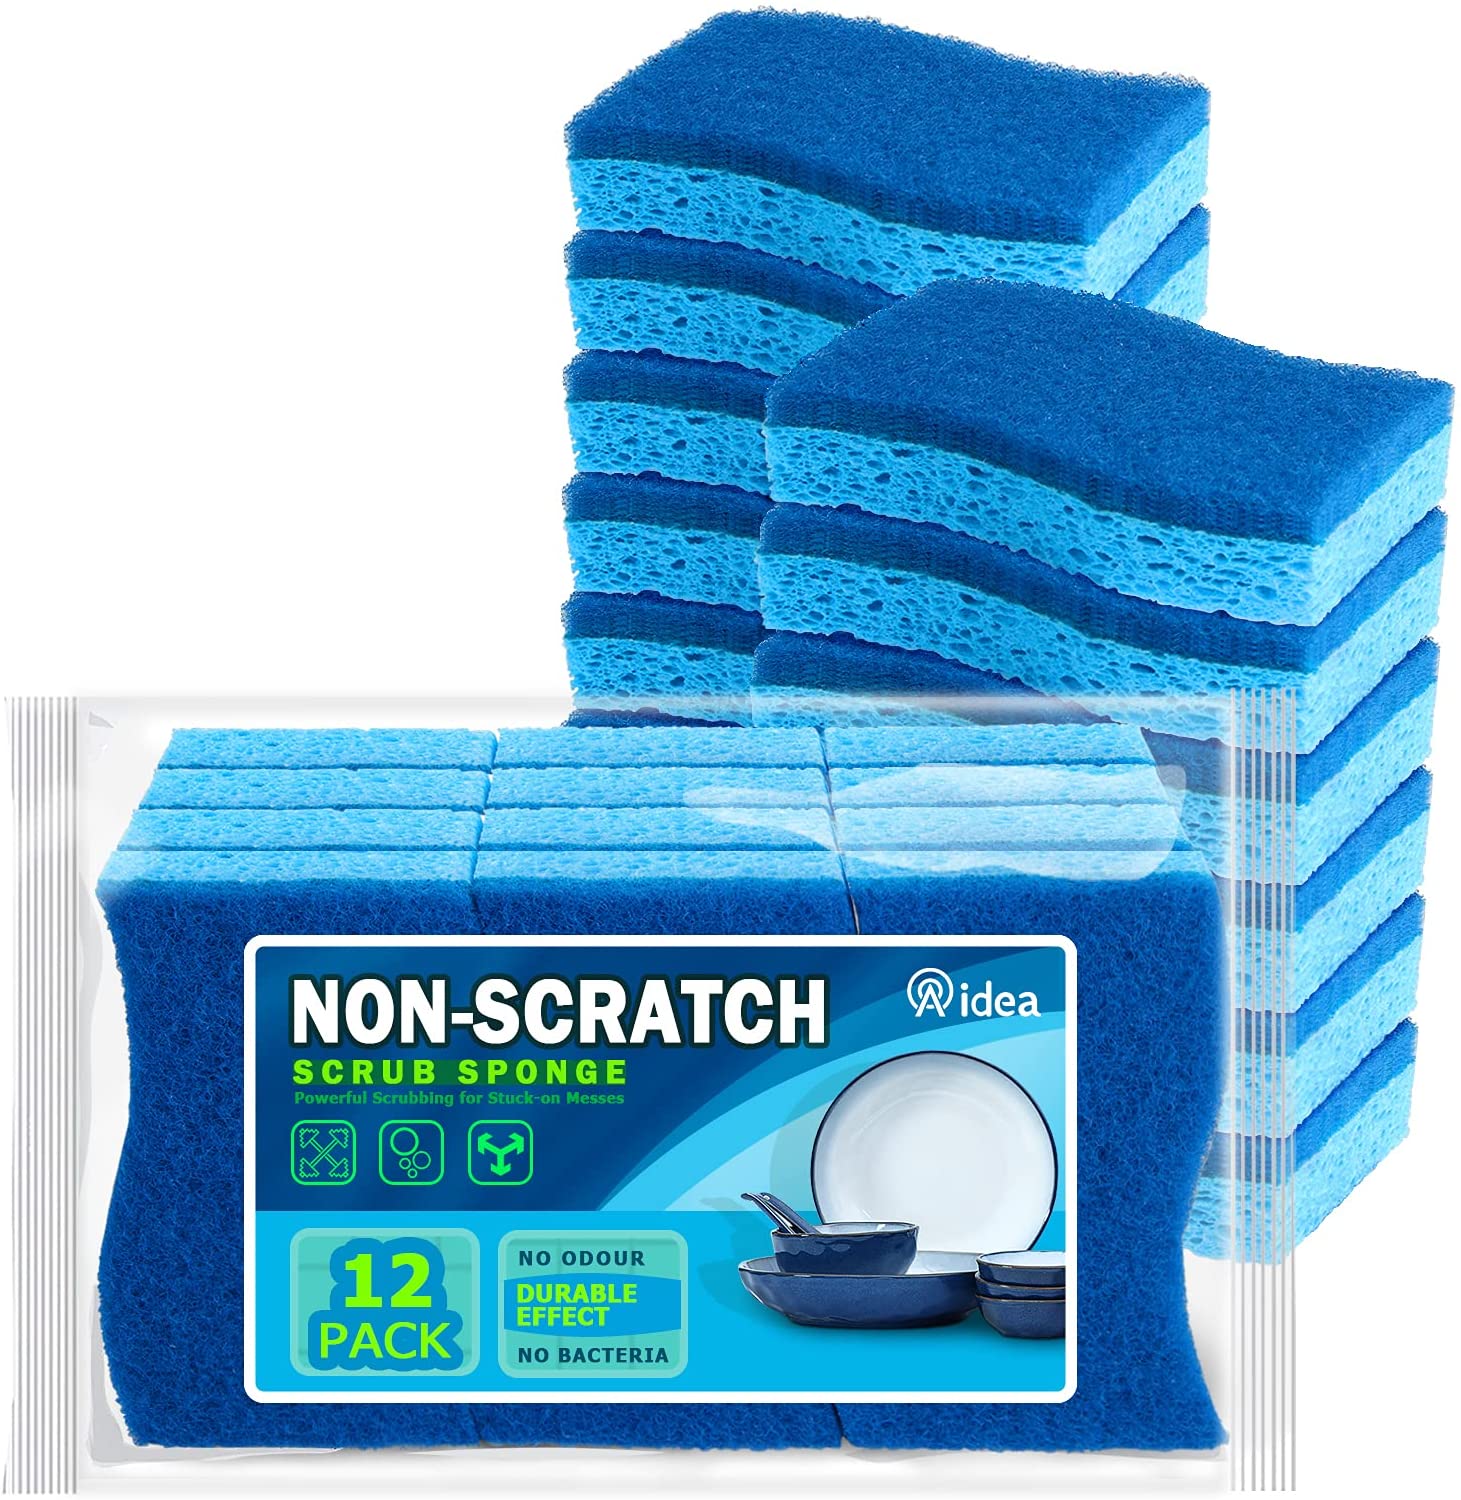 30 Pack Dish Sponge for Kitchen, Scrub Cleaning Sponge, Sponges for Dishes,  Great for Kitchen Dishwashing and Home Cleaning, Non Scratch Sponges,  Highly Absorbent, Durable and Reusable 